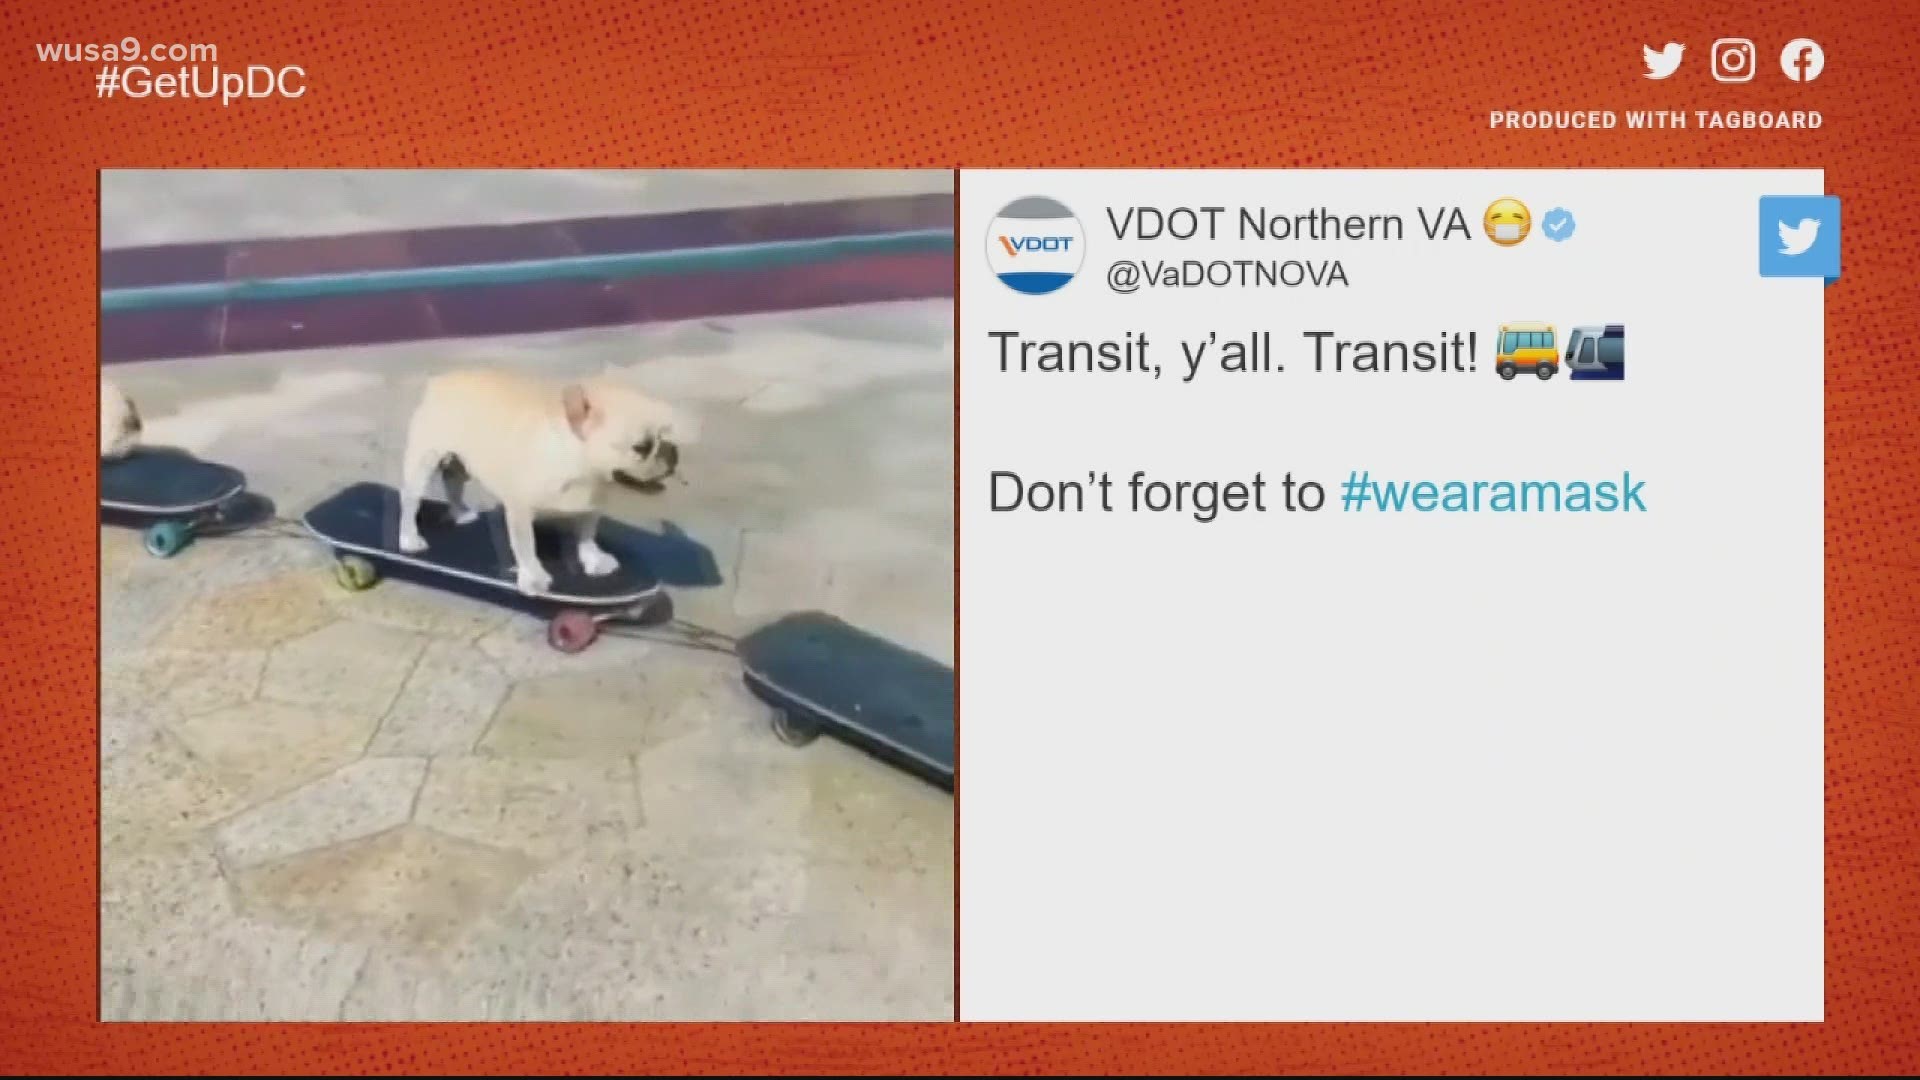 Virginia Department of Transportation reminds you of public transit with dogs on skateboards